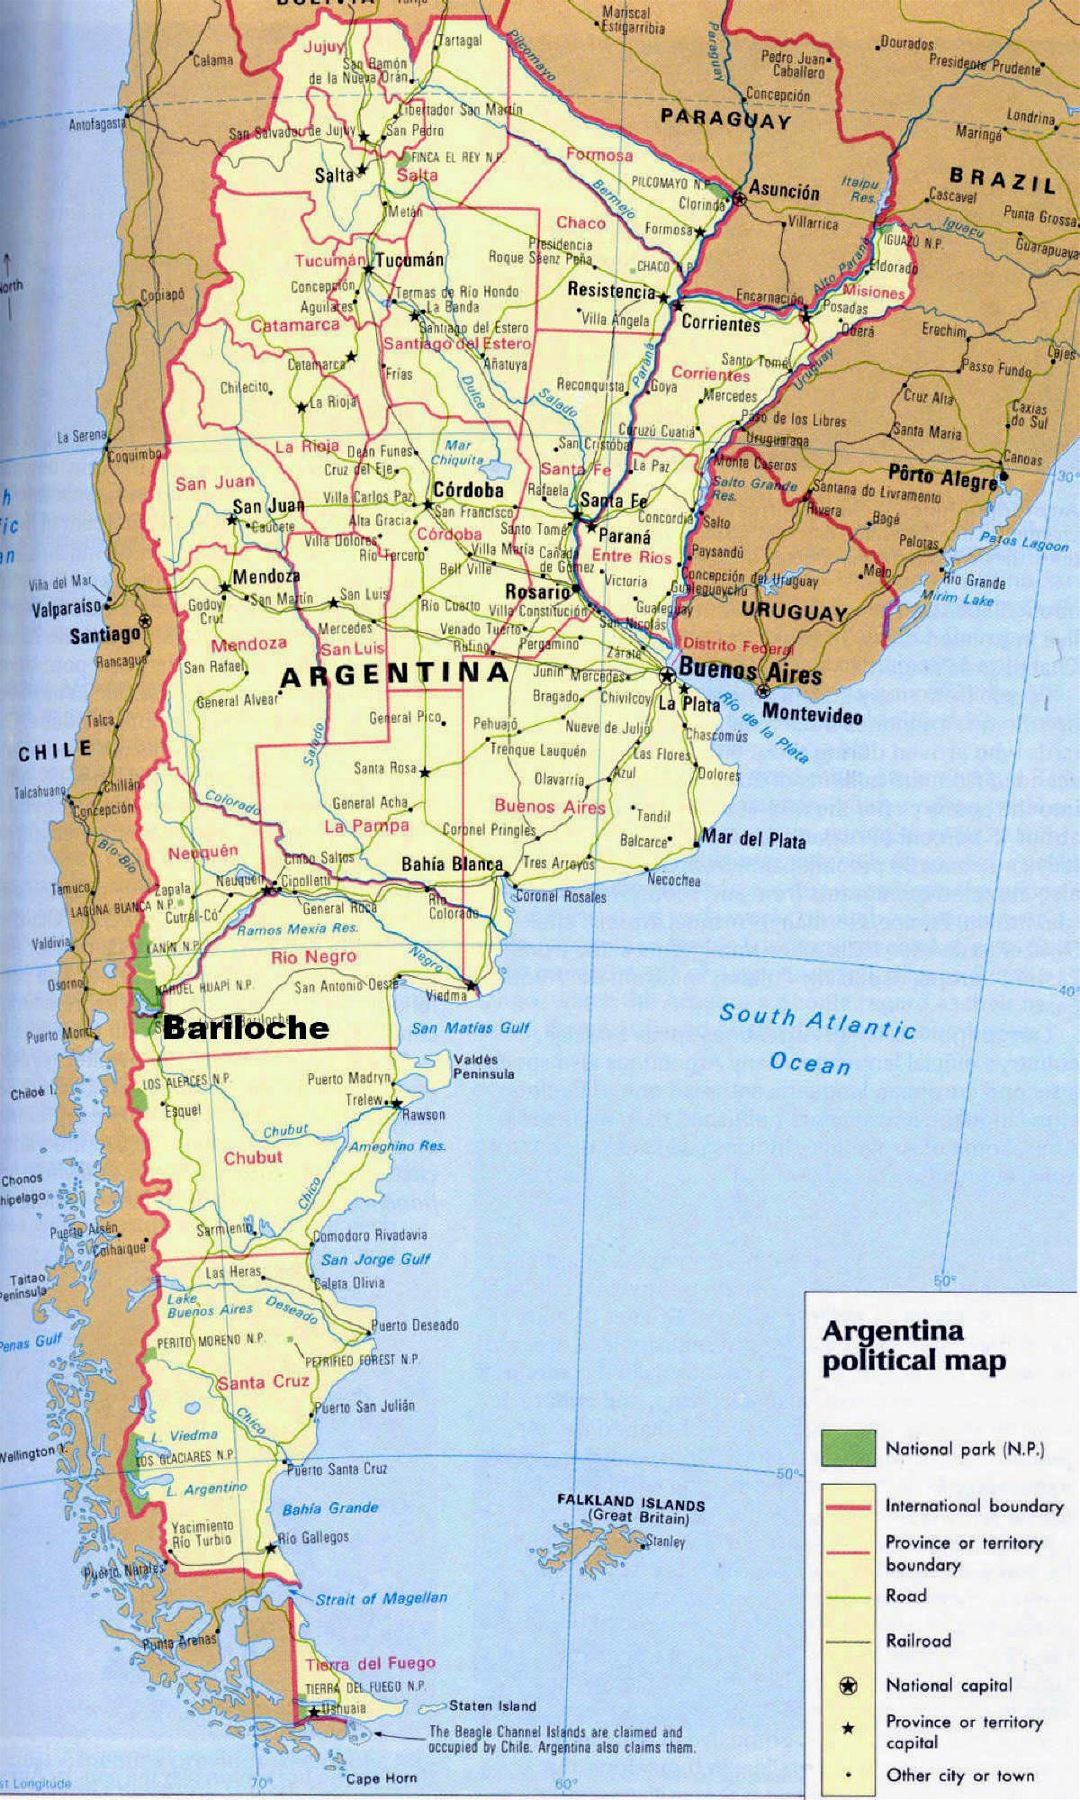 Detailed political map of Argentina with national parks